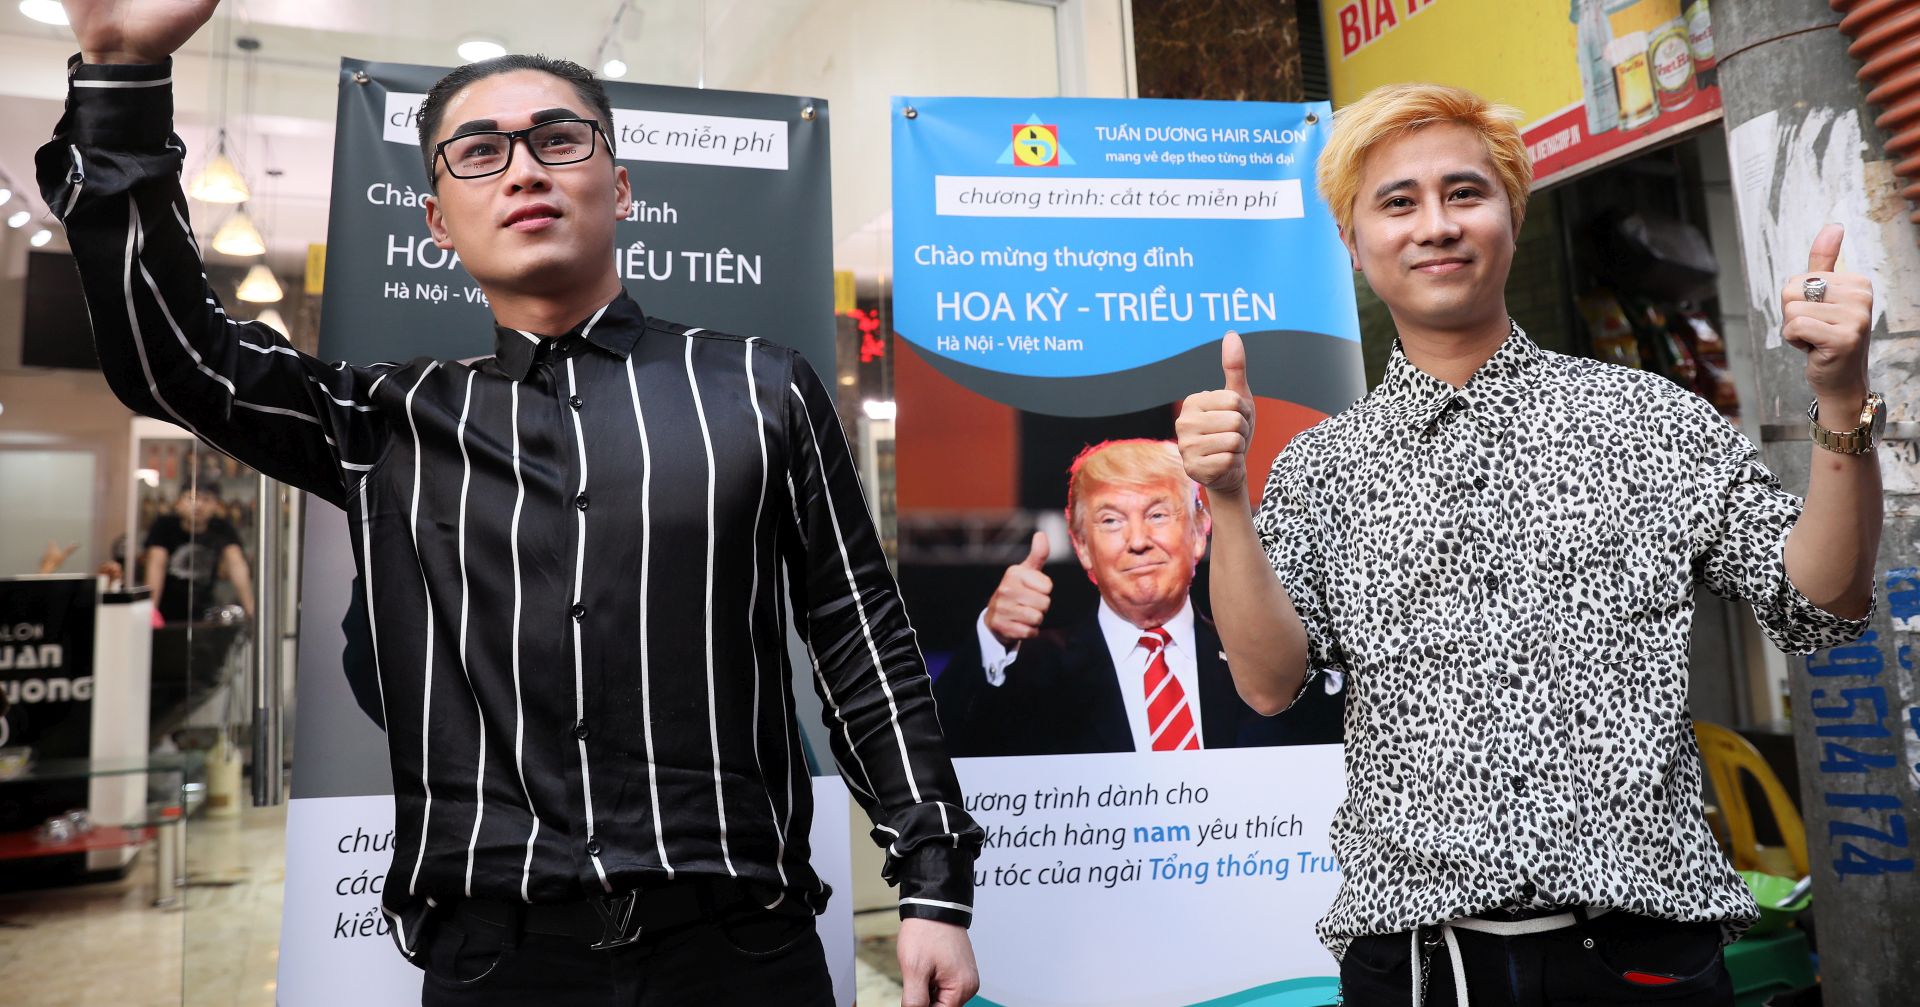 epa07383019 Two customers pose for a photo after having North Korean leader Kim Jong-un and US President Donald Trump haircuts style at a salon in Hanoi, Vietnam, 20 February 2019. Le Tuan Duong, the owner of a salon, has offered free Trump or Kim Jong-un hairstyles to any customer, a week before the two leader's second summit which will take place in Hanoi from 27 to 28 February 2019.  EPA/LUONG THAI LINH